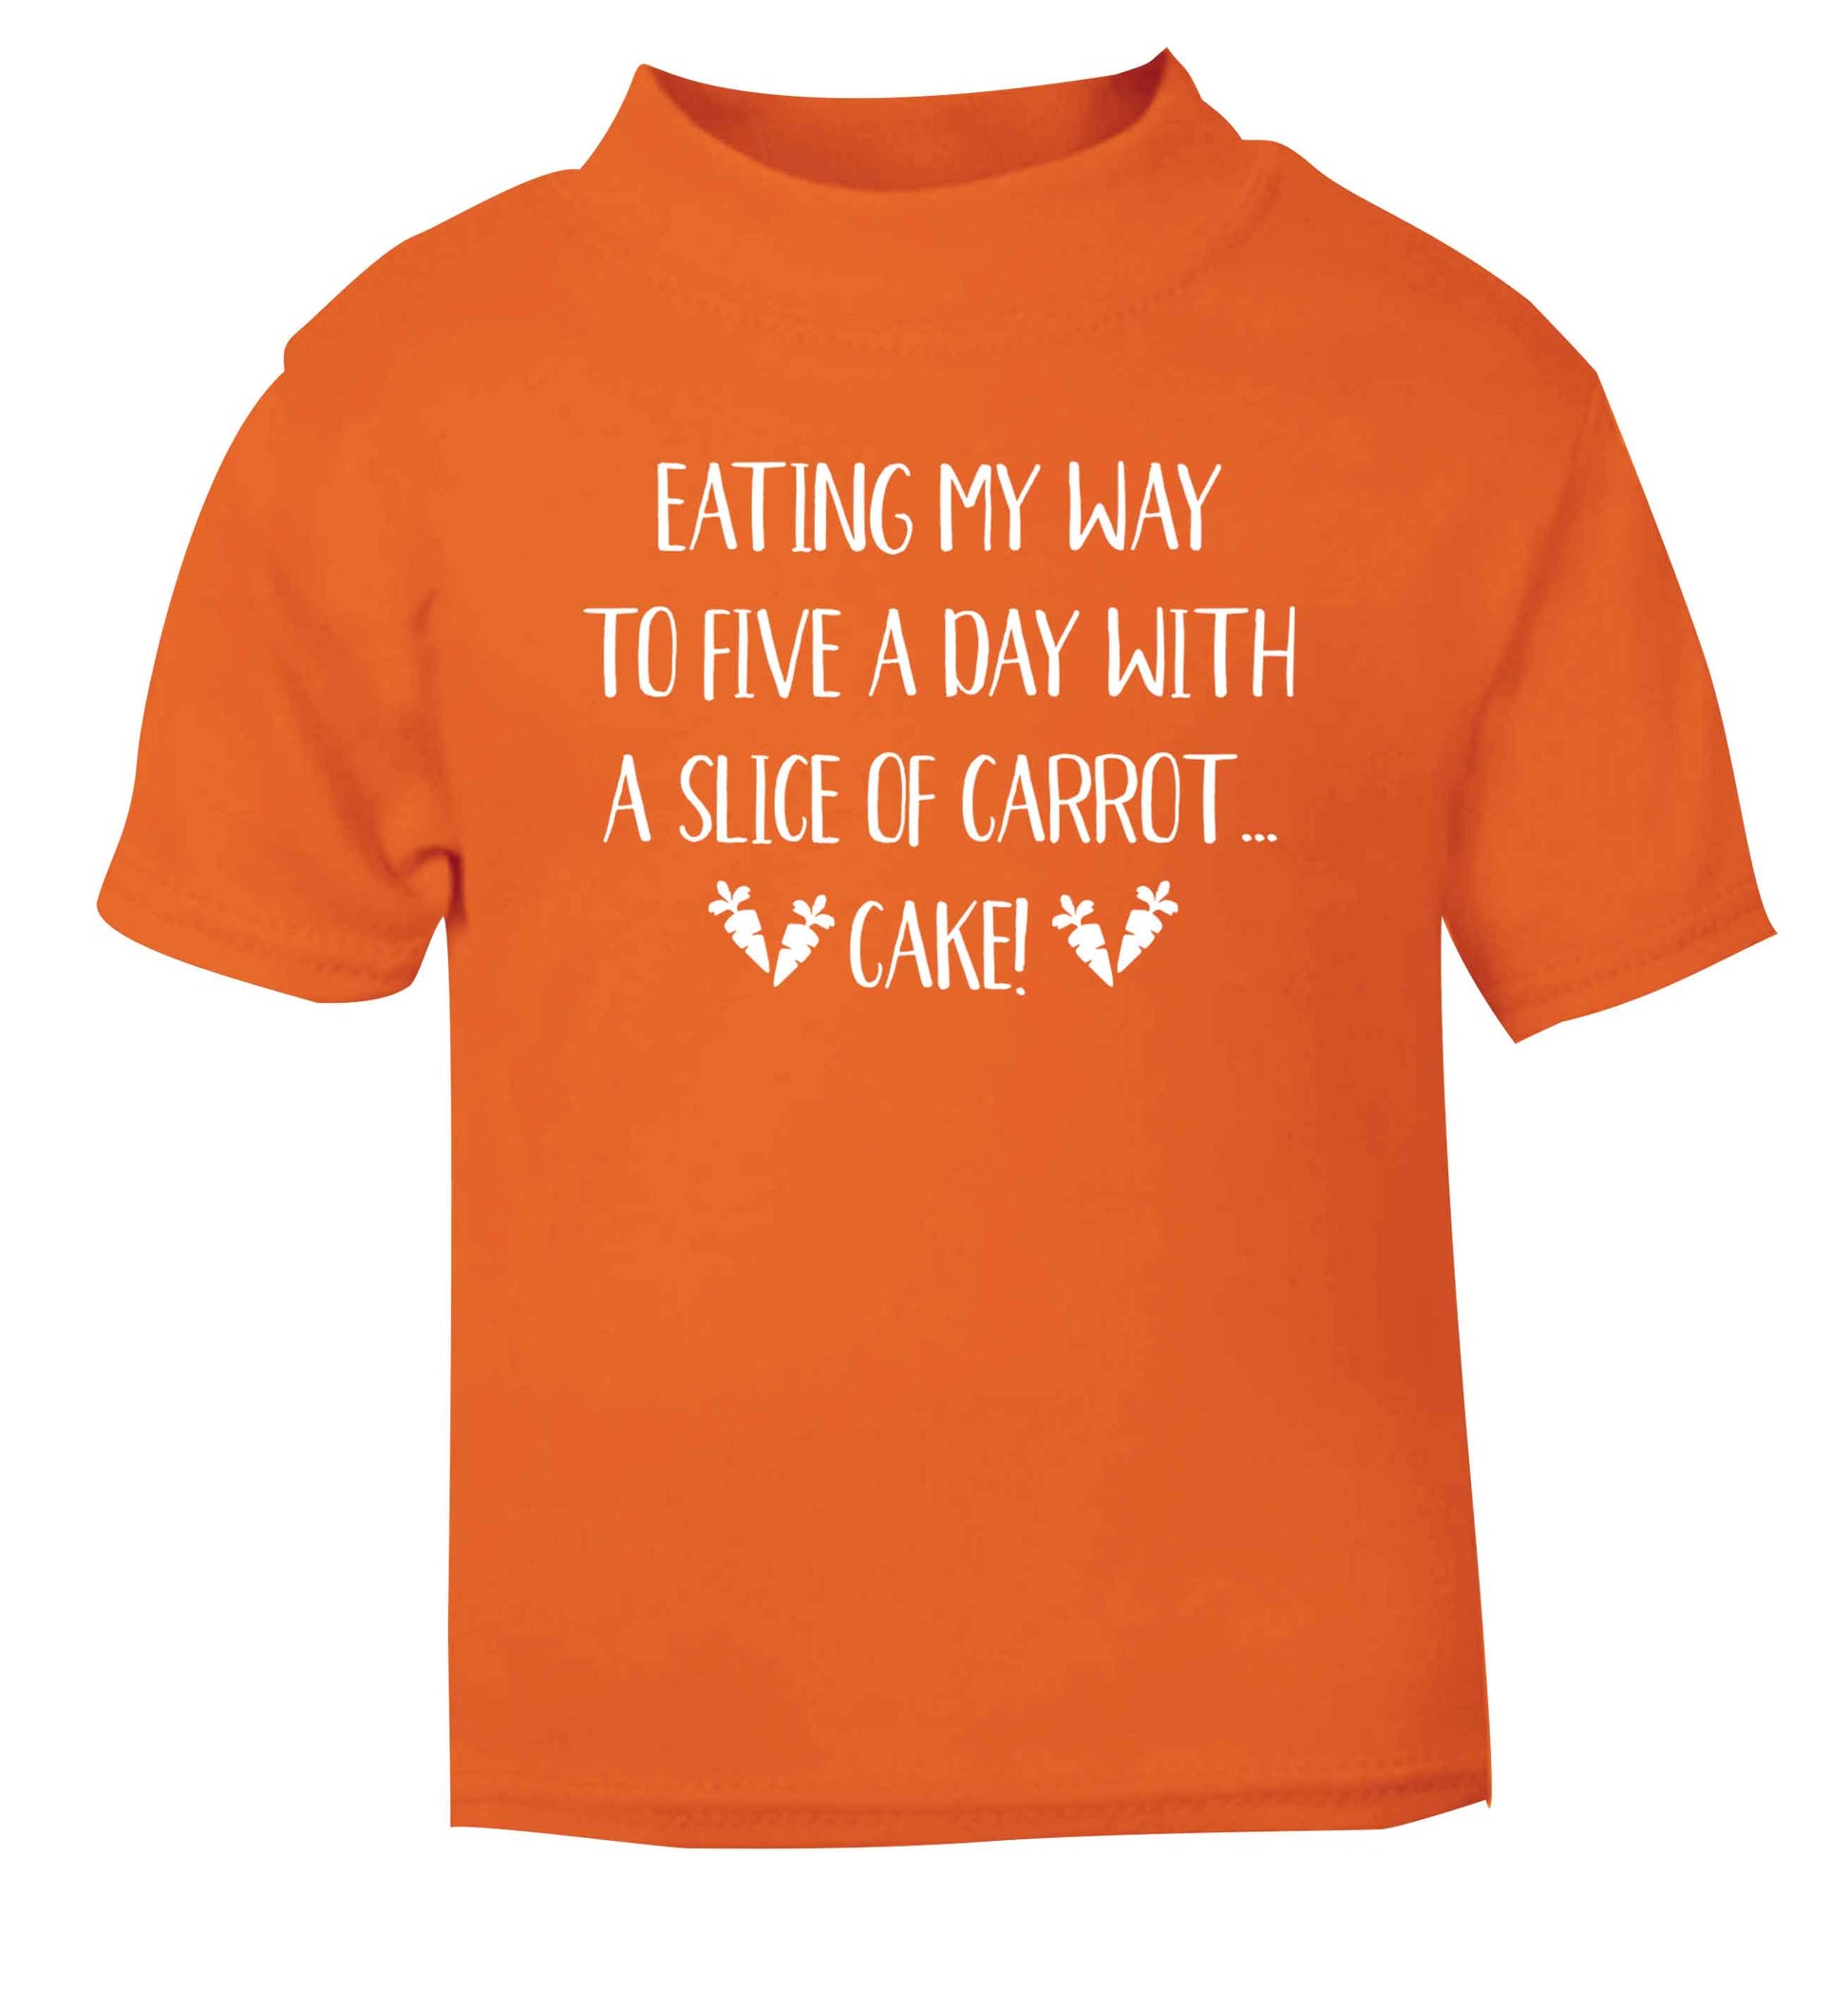 Eating my way to five a day with a slice of carrot cake day orange Baby Toddler Tshirt 2 Years